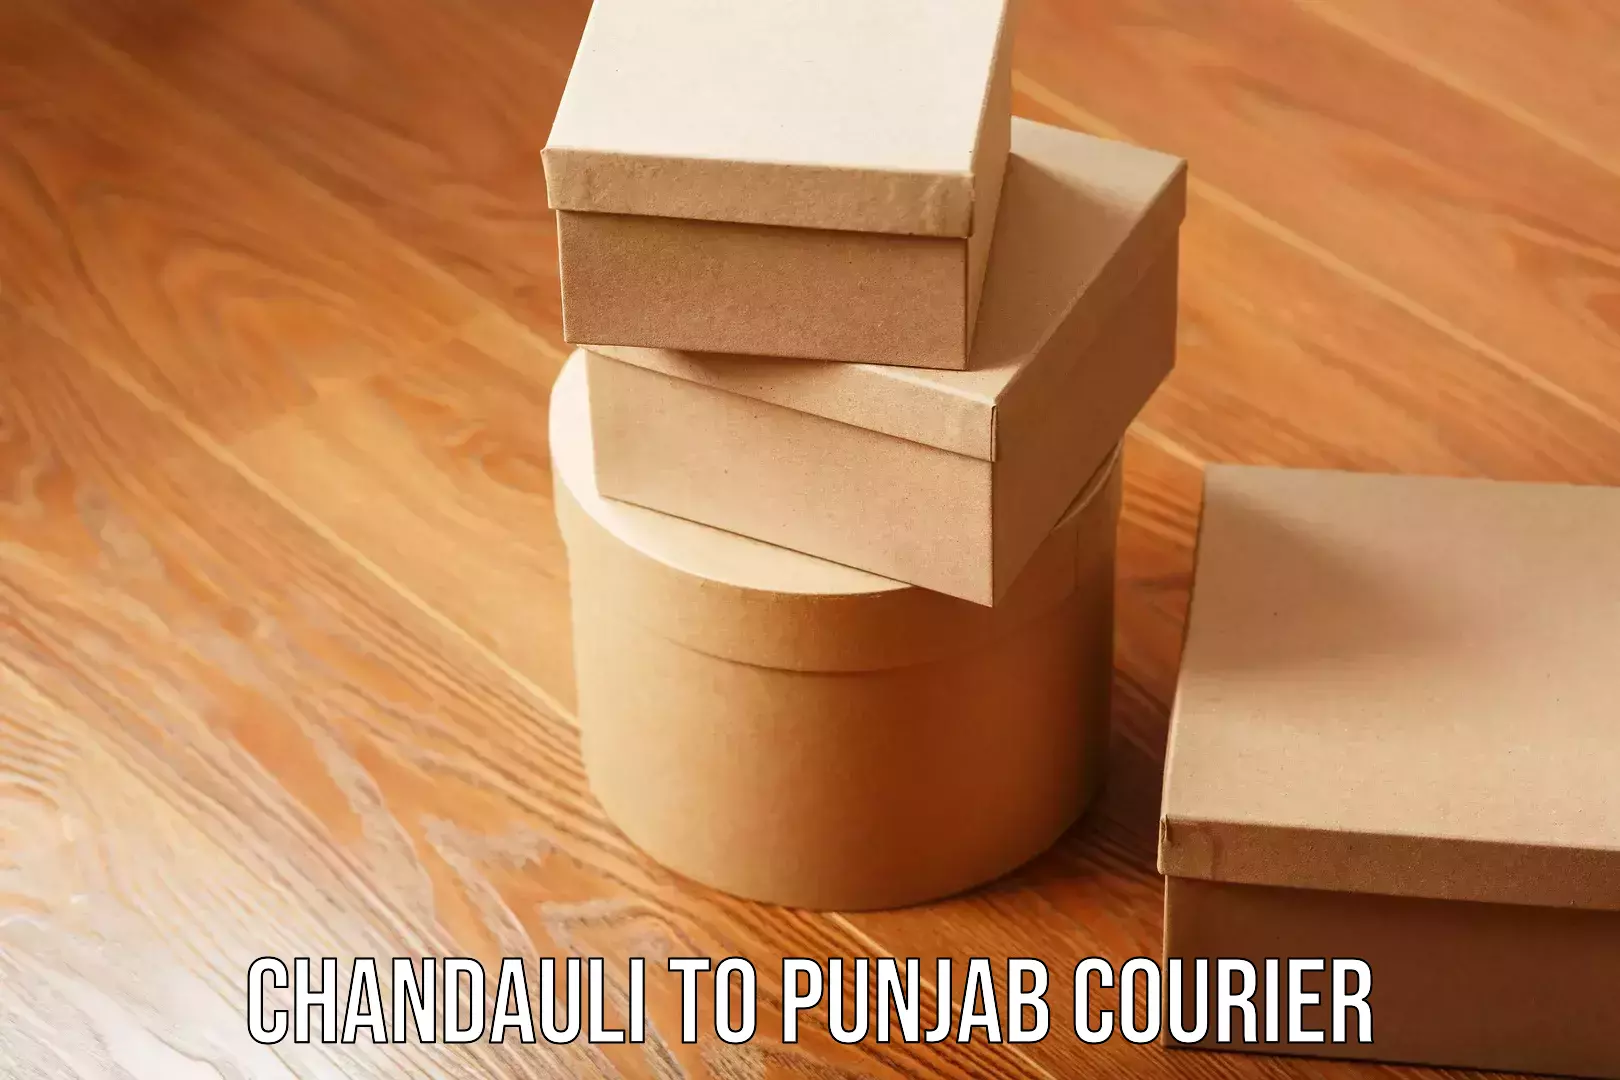 Sustainable courier practices Chandauli to Punjab